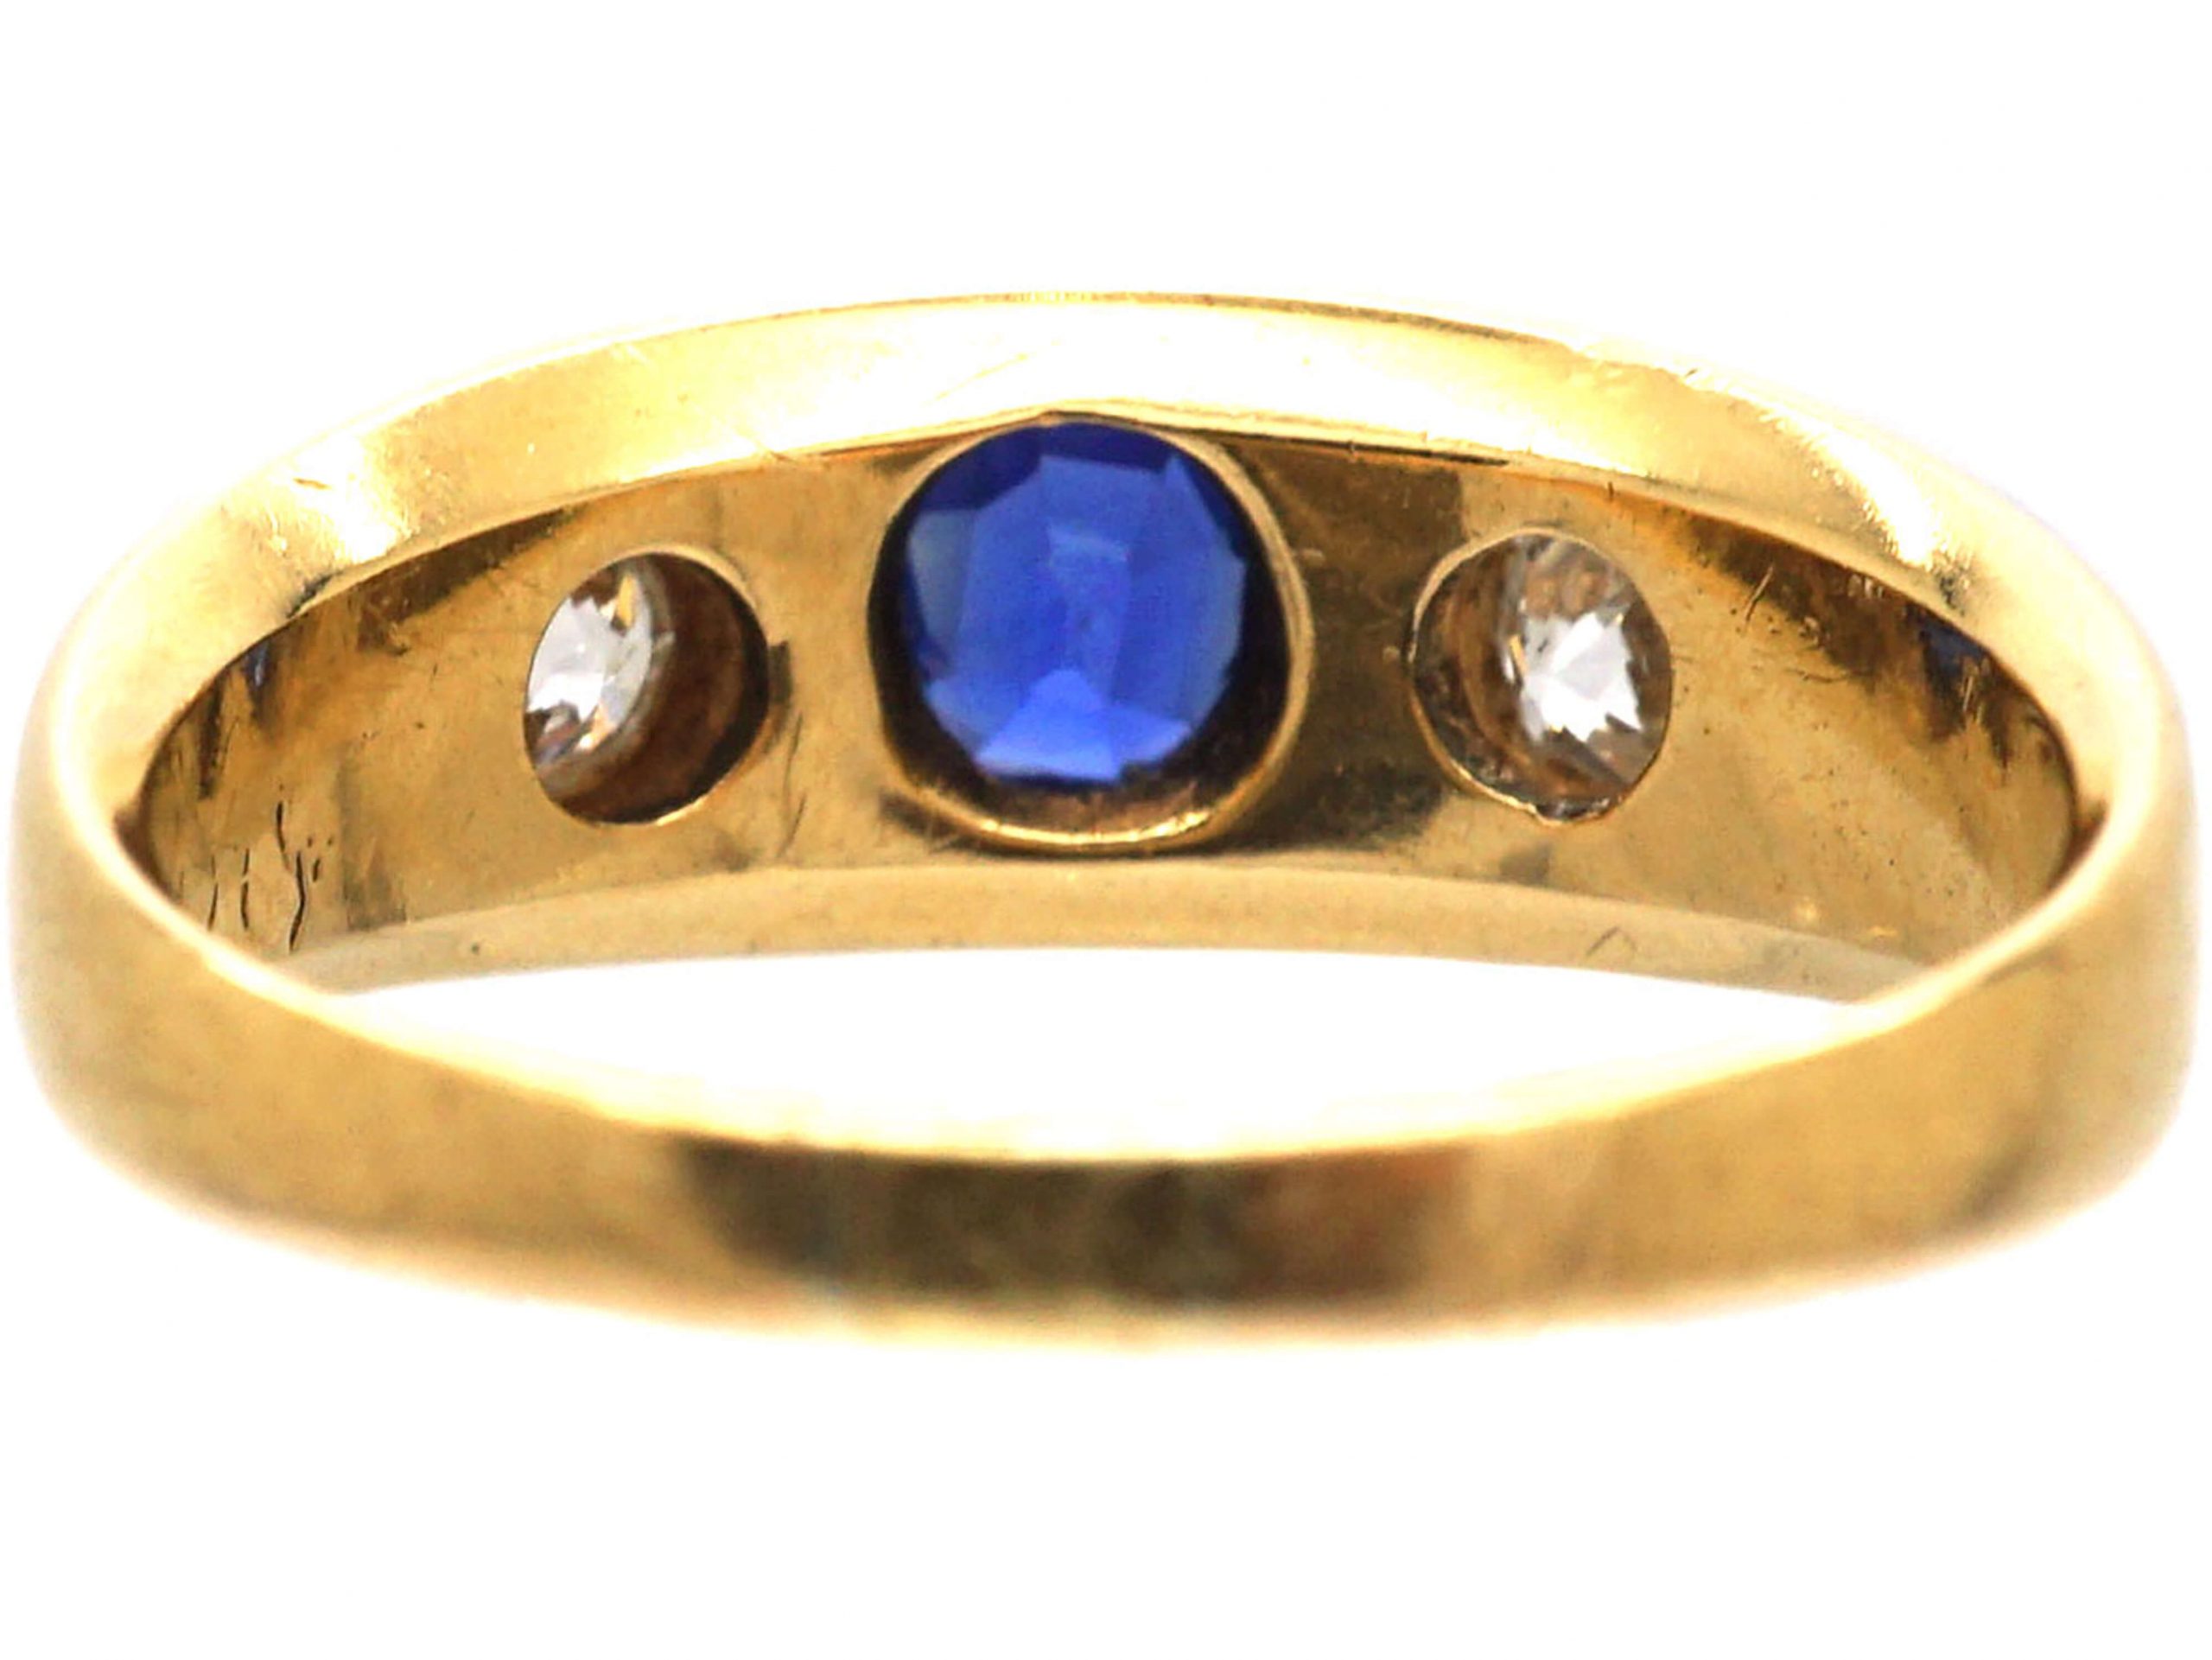 Victorian 18ct Gold Sapphire & Diamond Gypsy Ring (267T) | The Antique ...